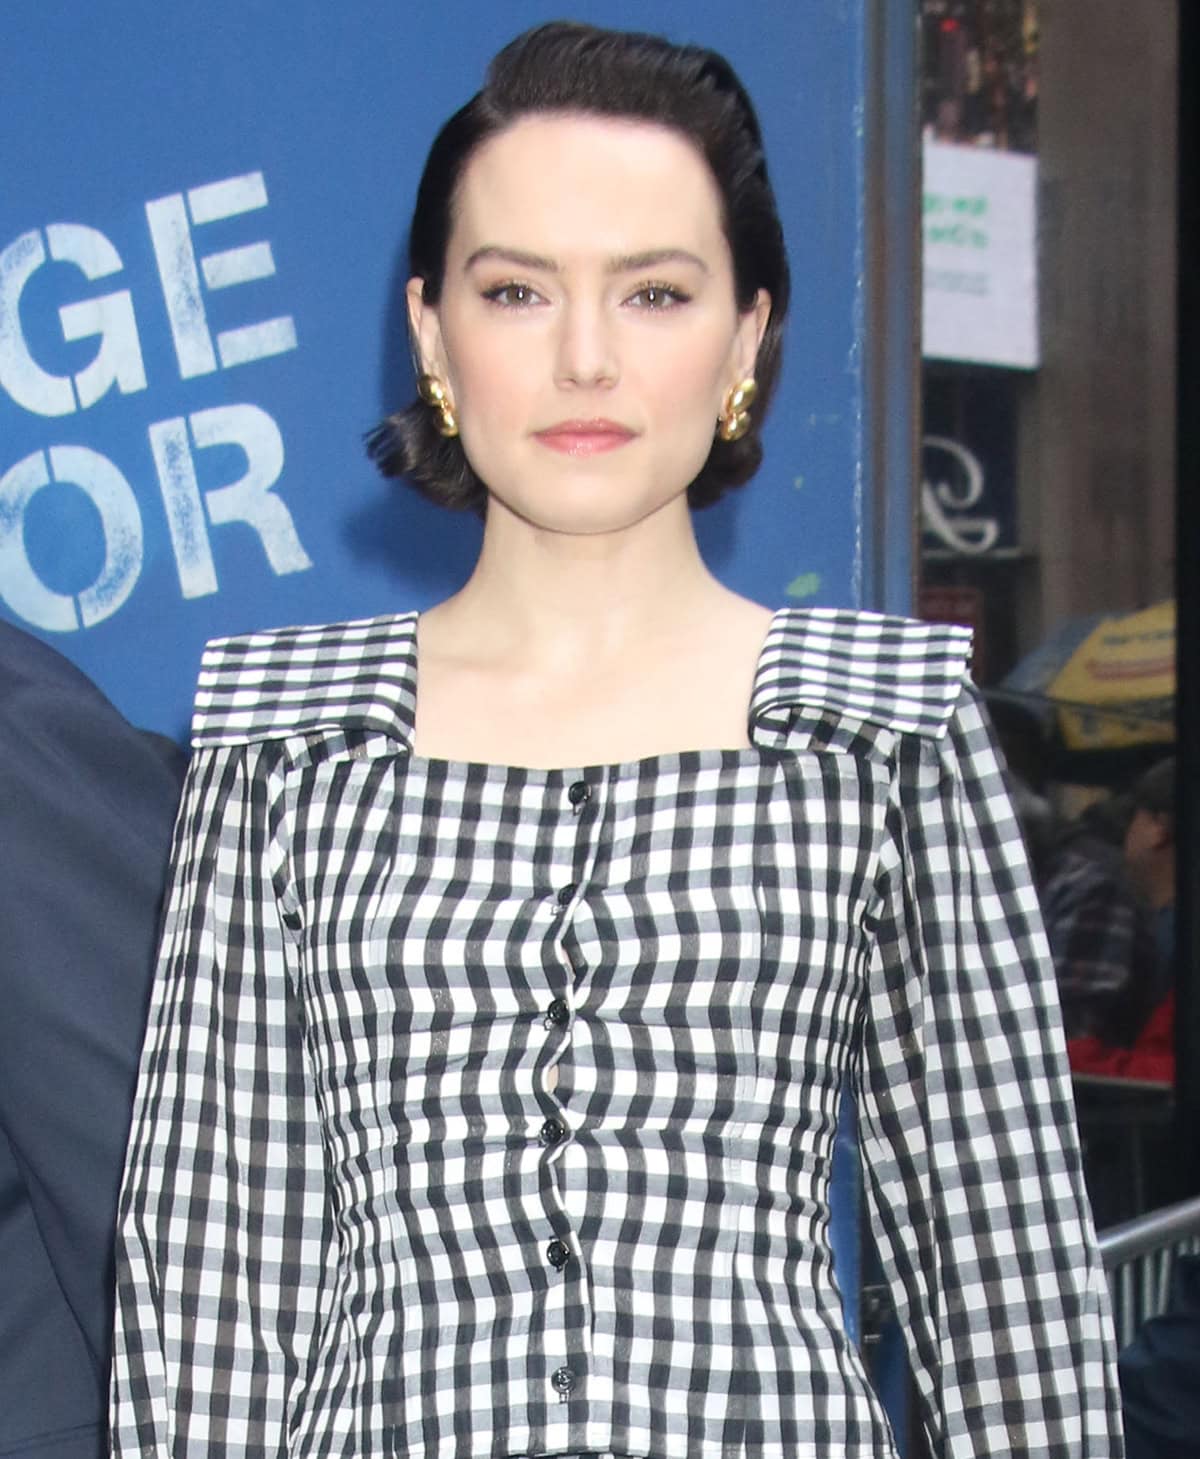 Daisy Ridley wears soft makeup and a slicked-back hairstyle and styles her outfit with Belperron gold jewelry